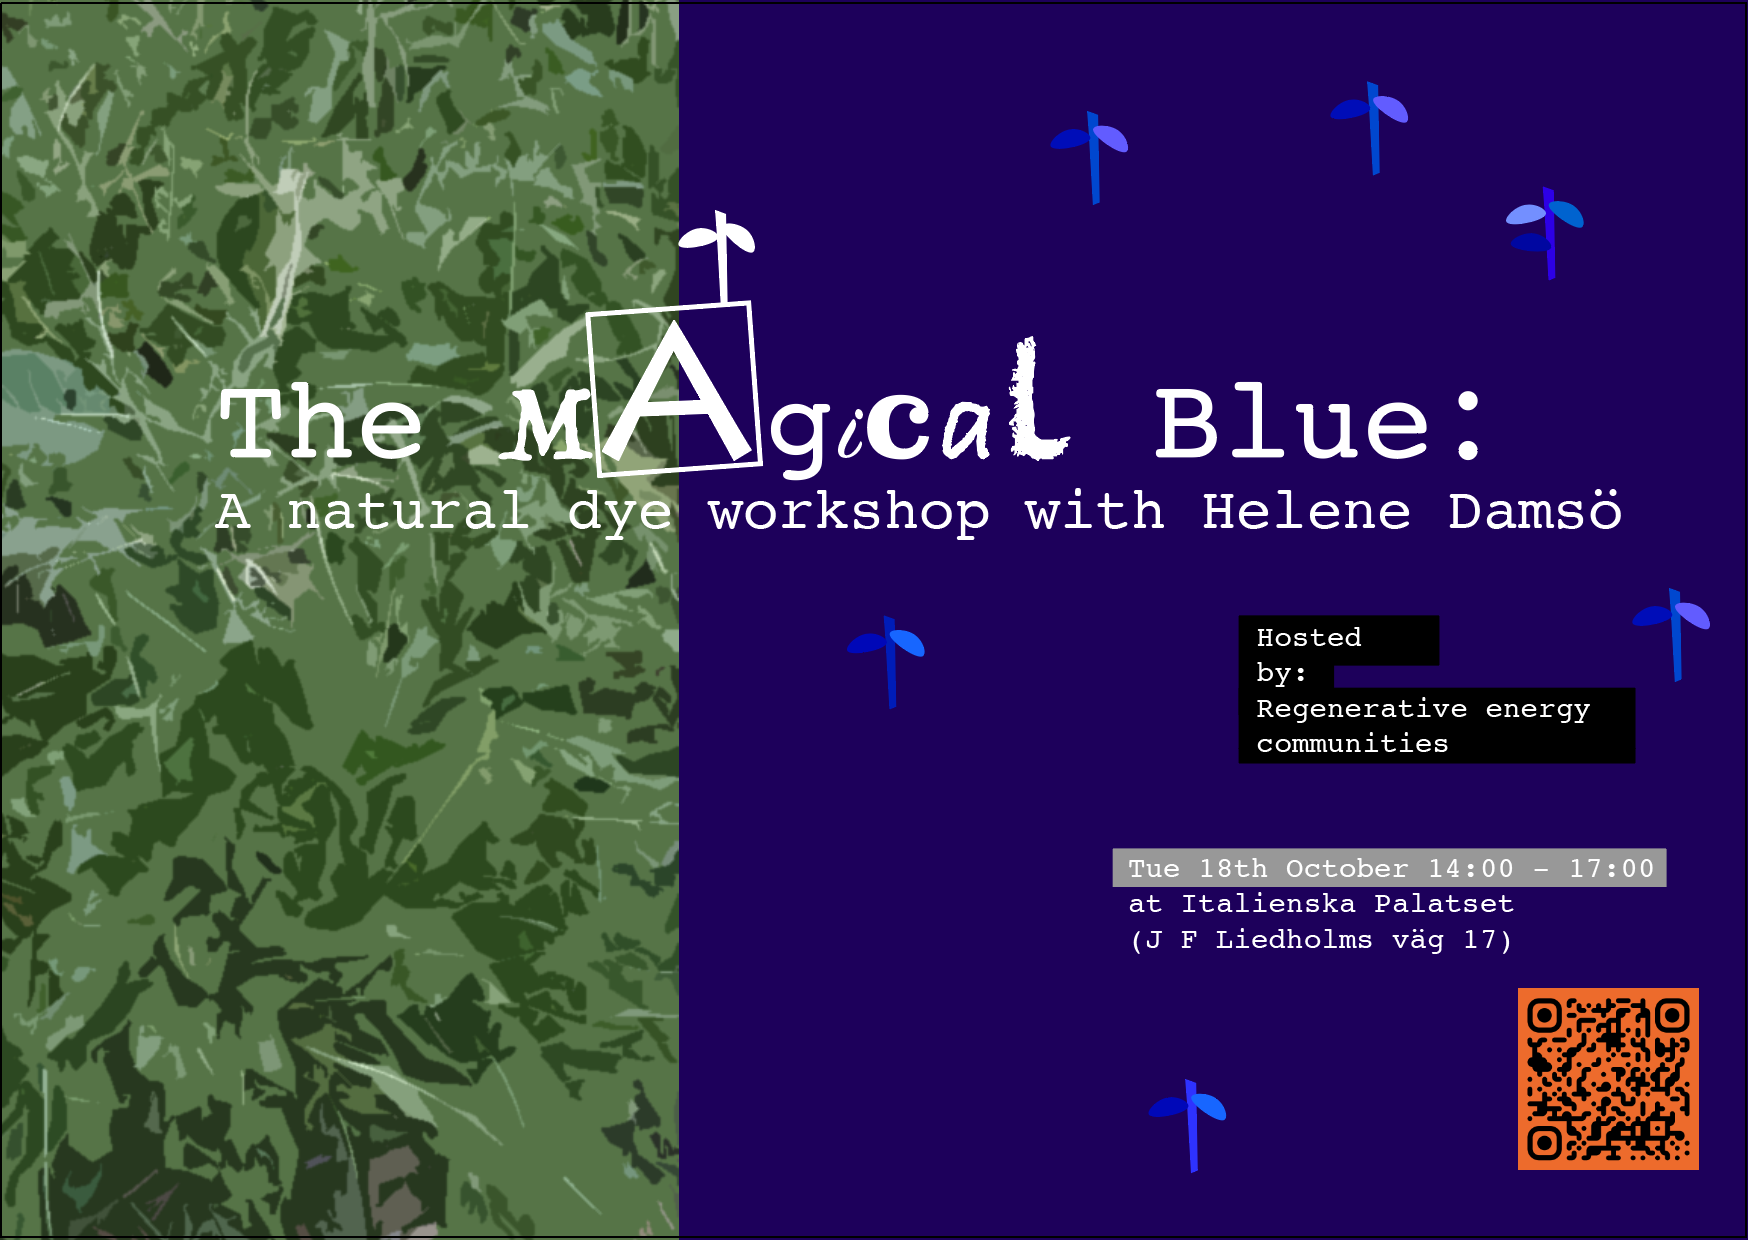 Poster image for The Magical Blue workshop with image of woad plants in the background